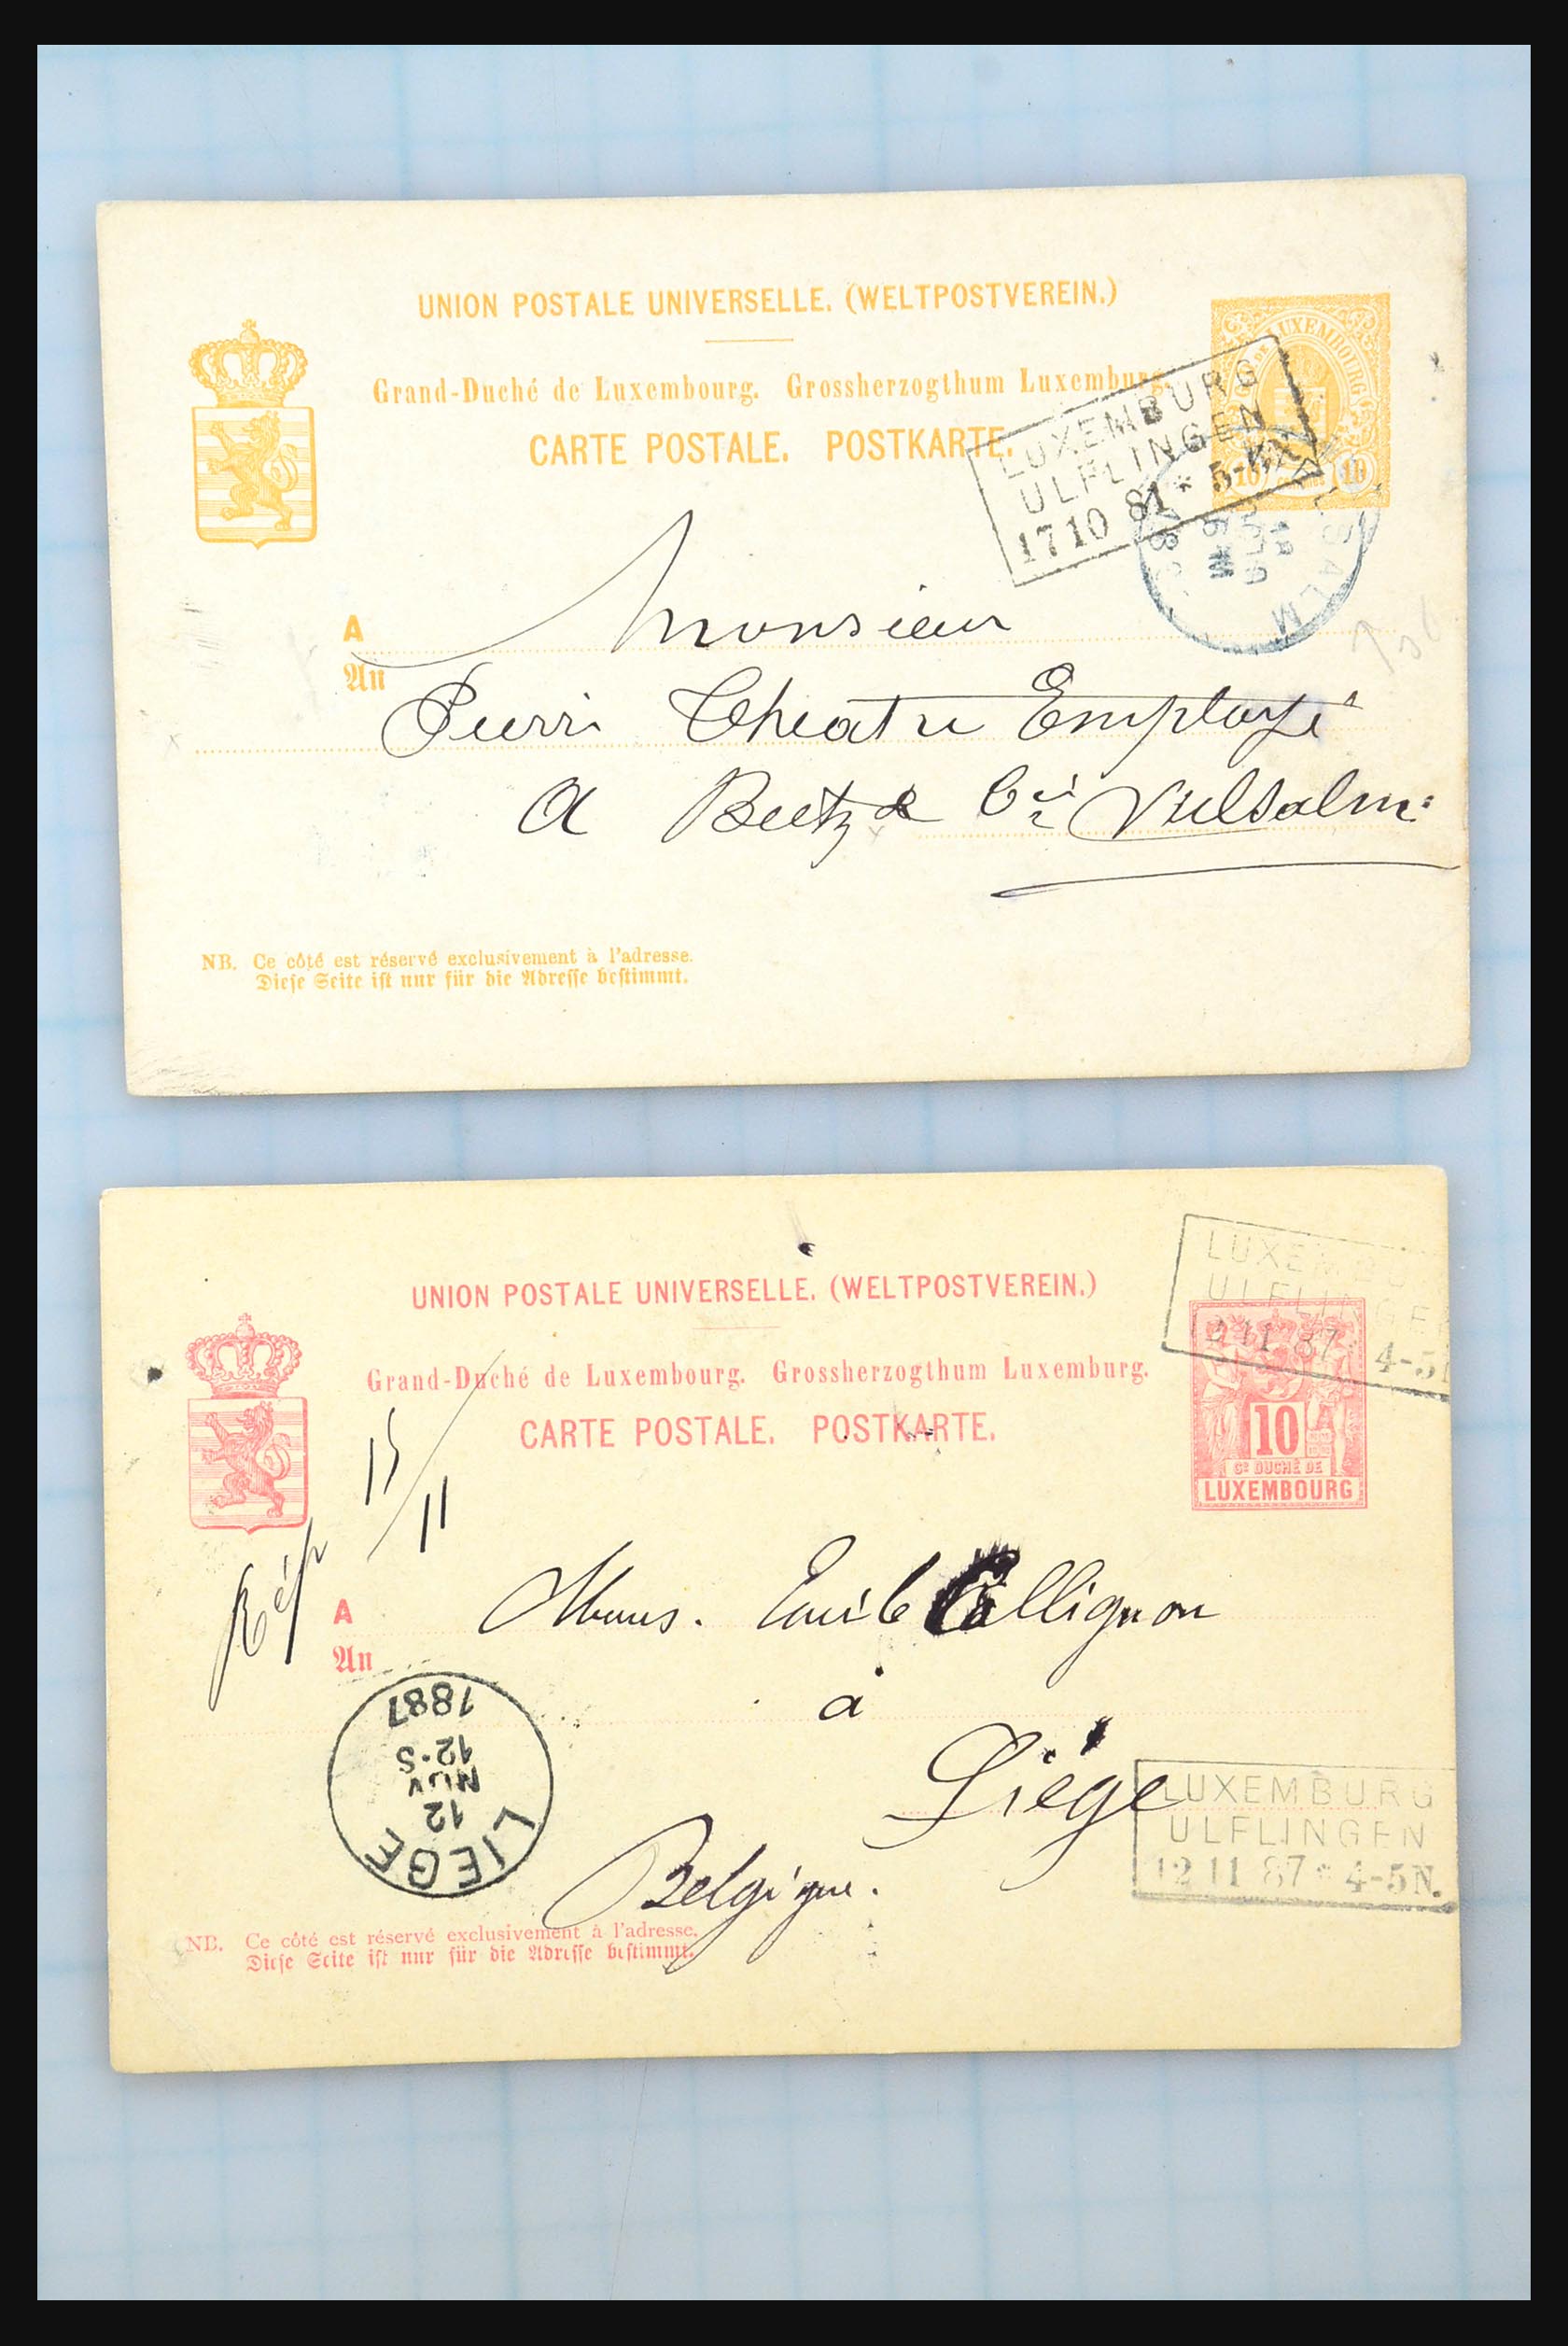 31358 098 - 31358 Portugal/Luxemburg/Greece covers 1880-1960.